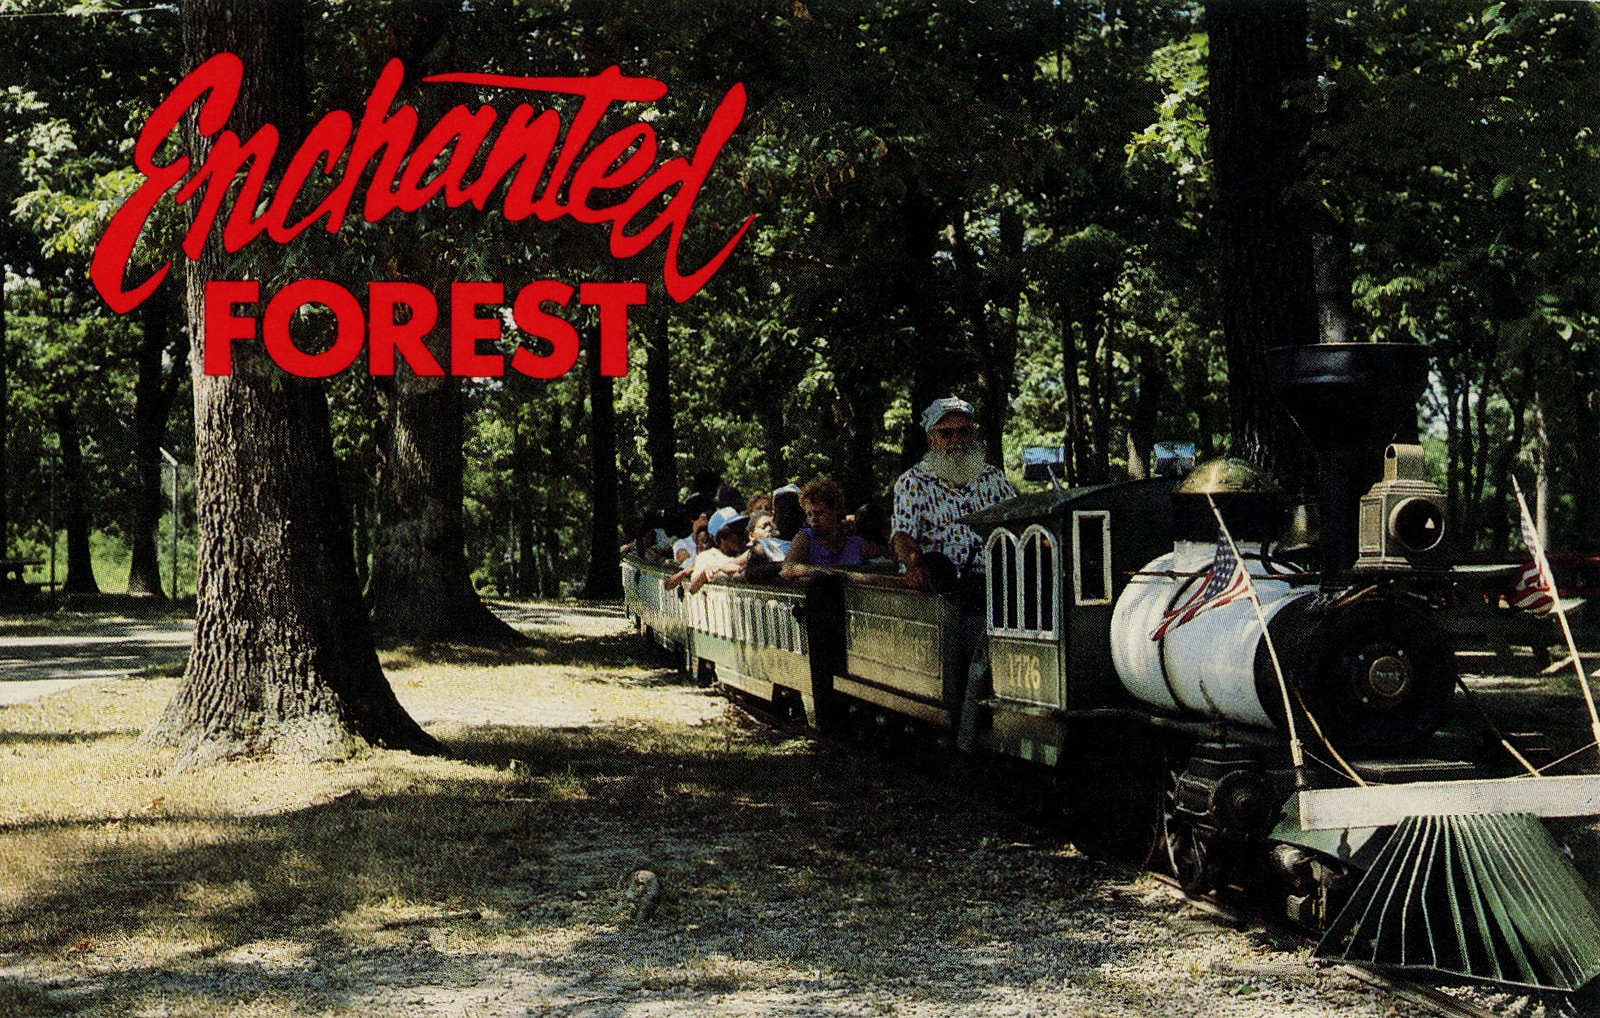 Train Ride at Enchanted Forest Amusement Park, 1972 - Chesterton, Indiana